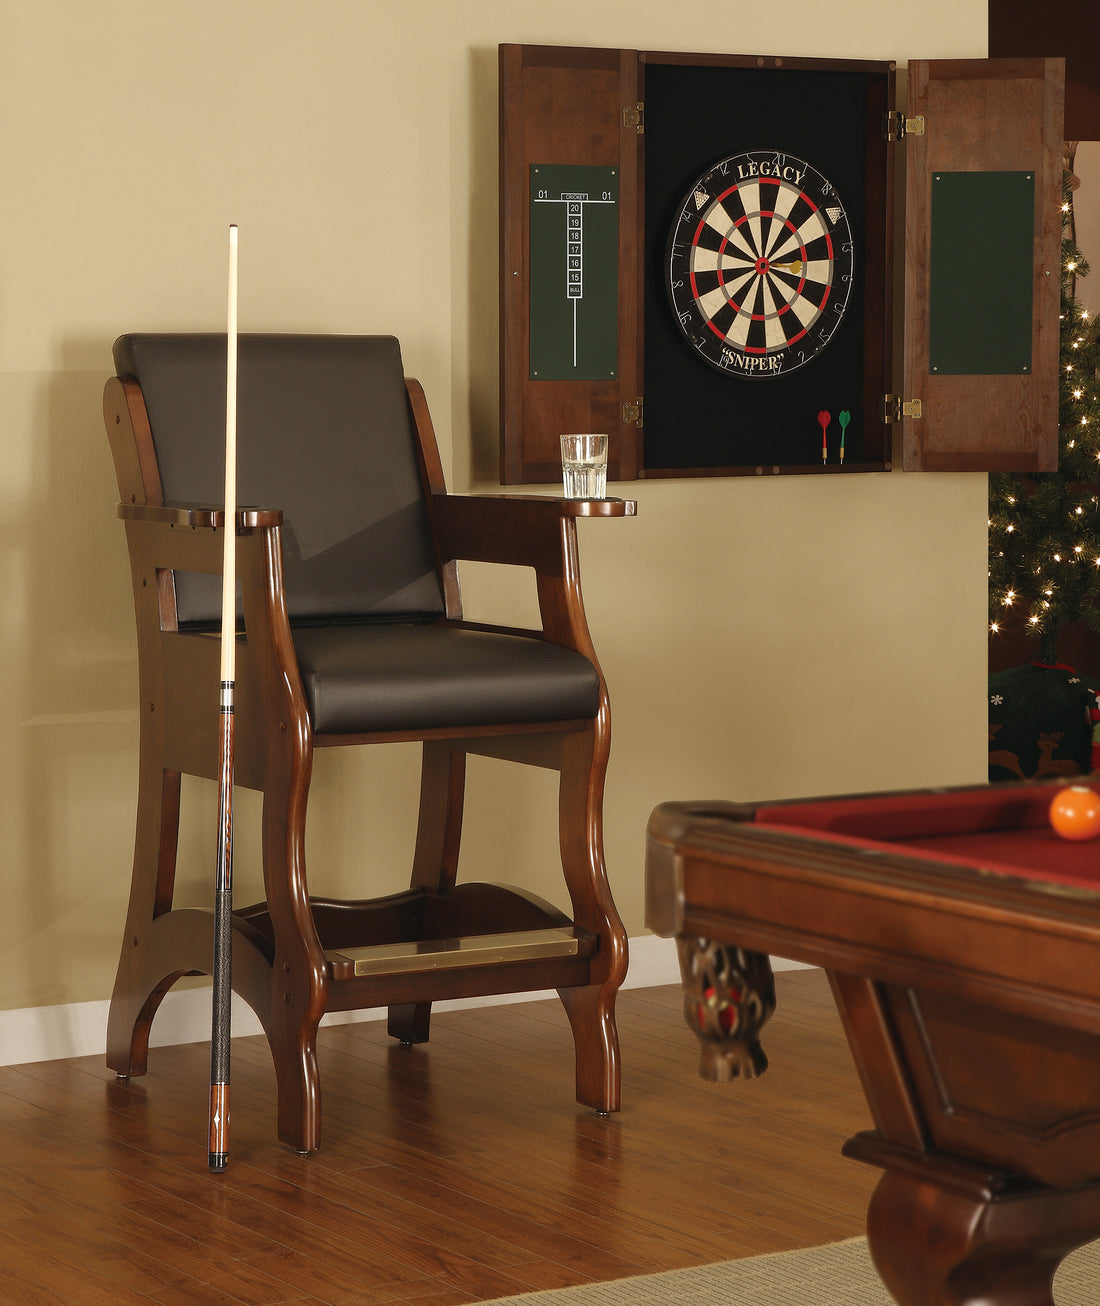 Legacy Billiards Elite Spectator Room Shot with Pool Table and Dartboard